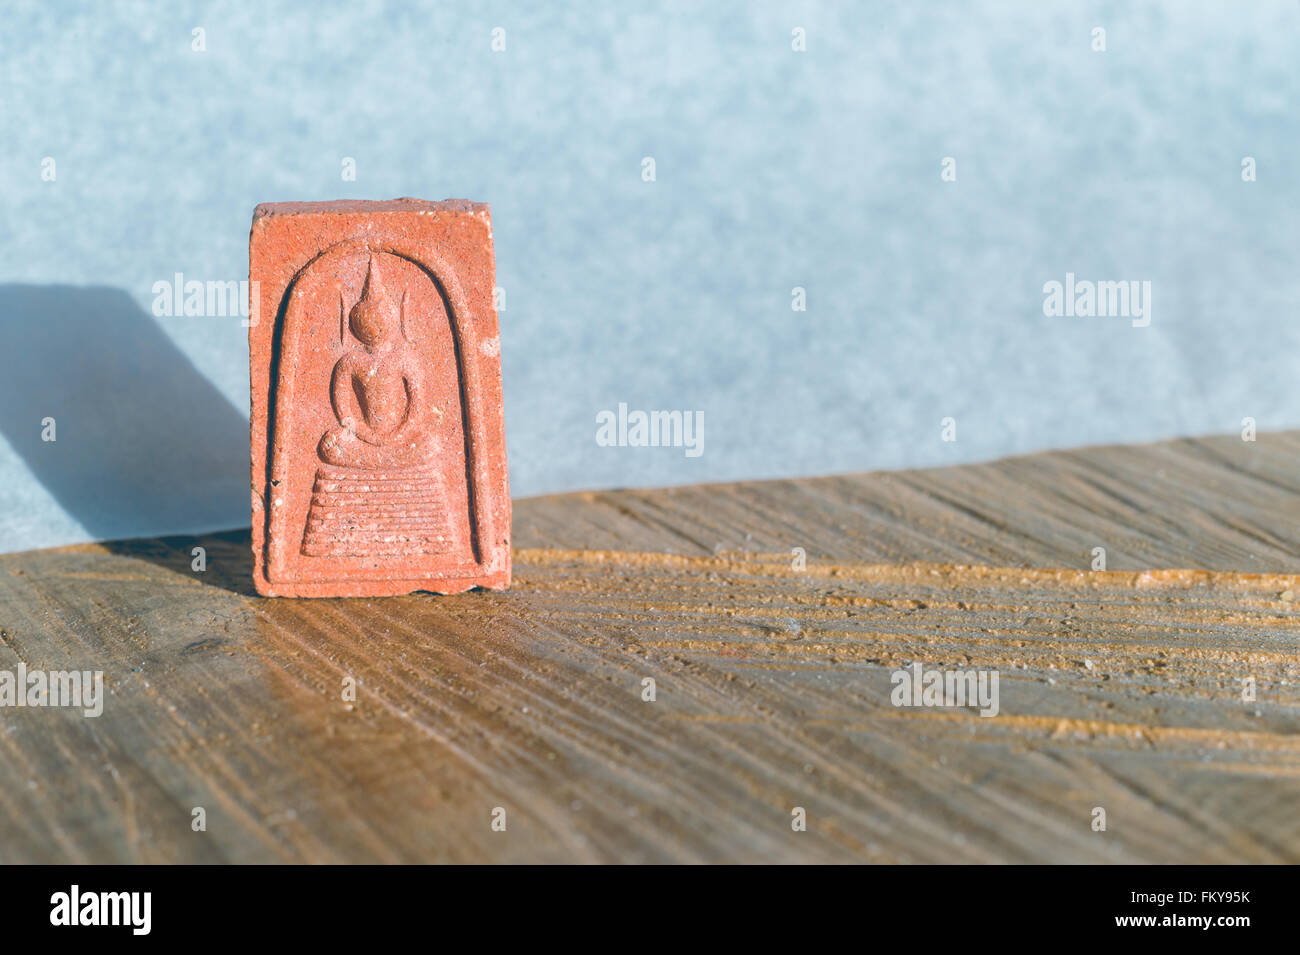 Close-up of a Pra Somdej Buddha clay amulet with copyspace Stock Photo